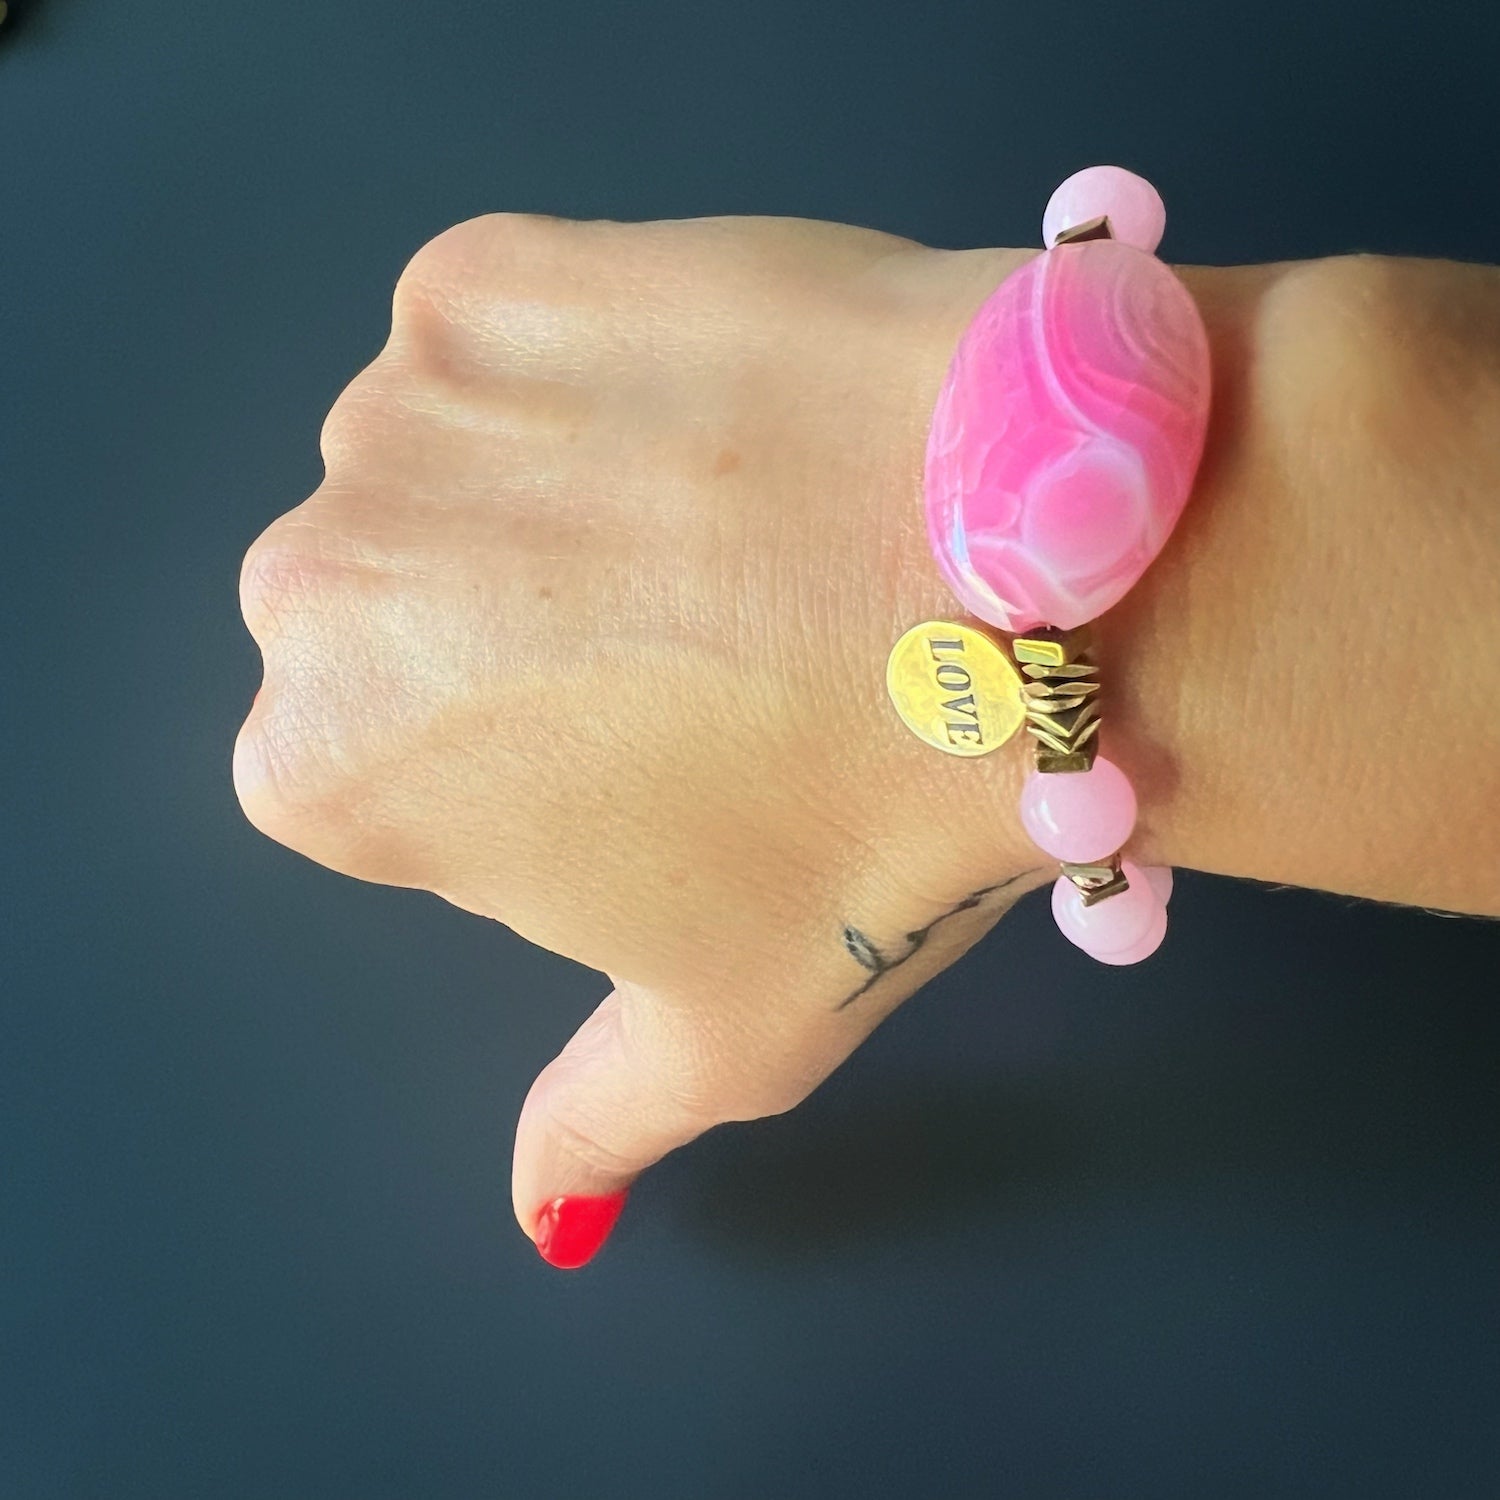 See how the Pink Agate Love Bracelet adorns the hand model's wrist, radiating romance and enchantment.